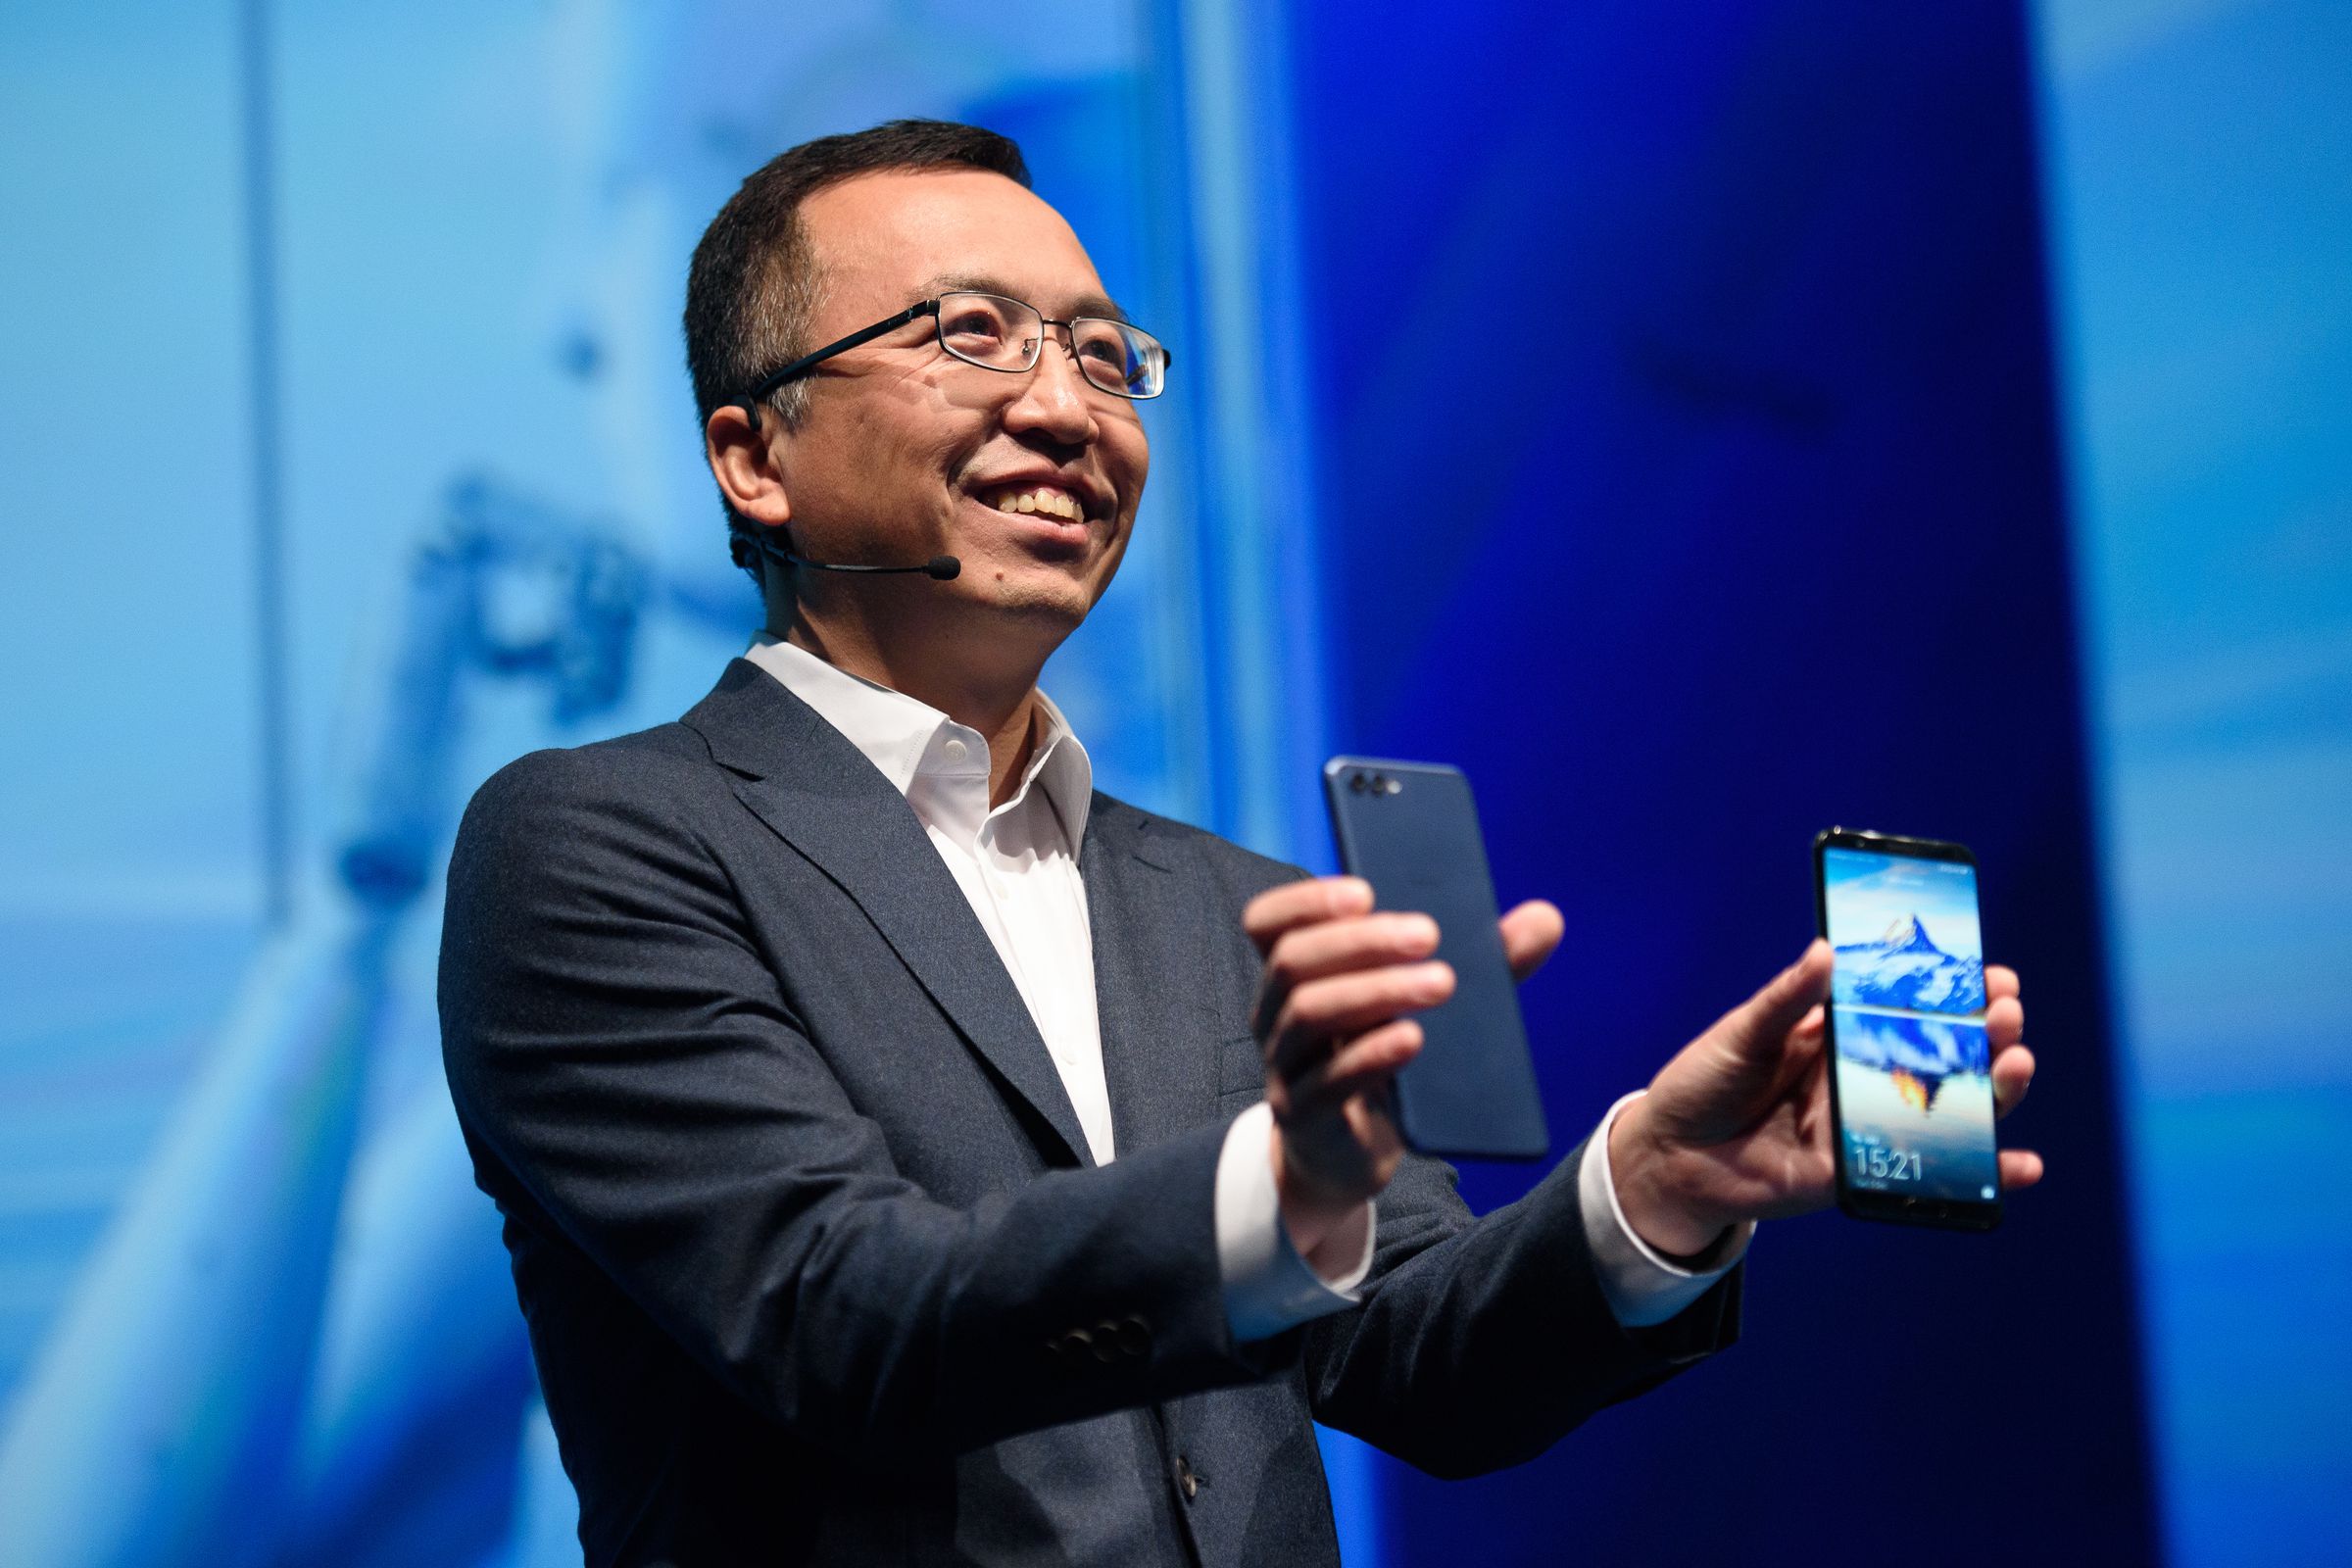 President of Honor, George Zhao unveils two new Honor products; Honor 7X a full view screen display handset and Honor V10, a new artificial intelligence handset, at the global launch event on December 5, 2017 in London, England.